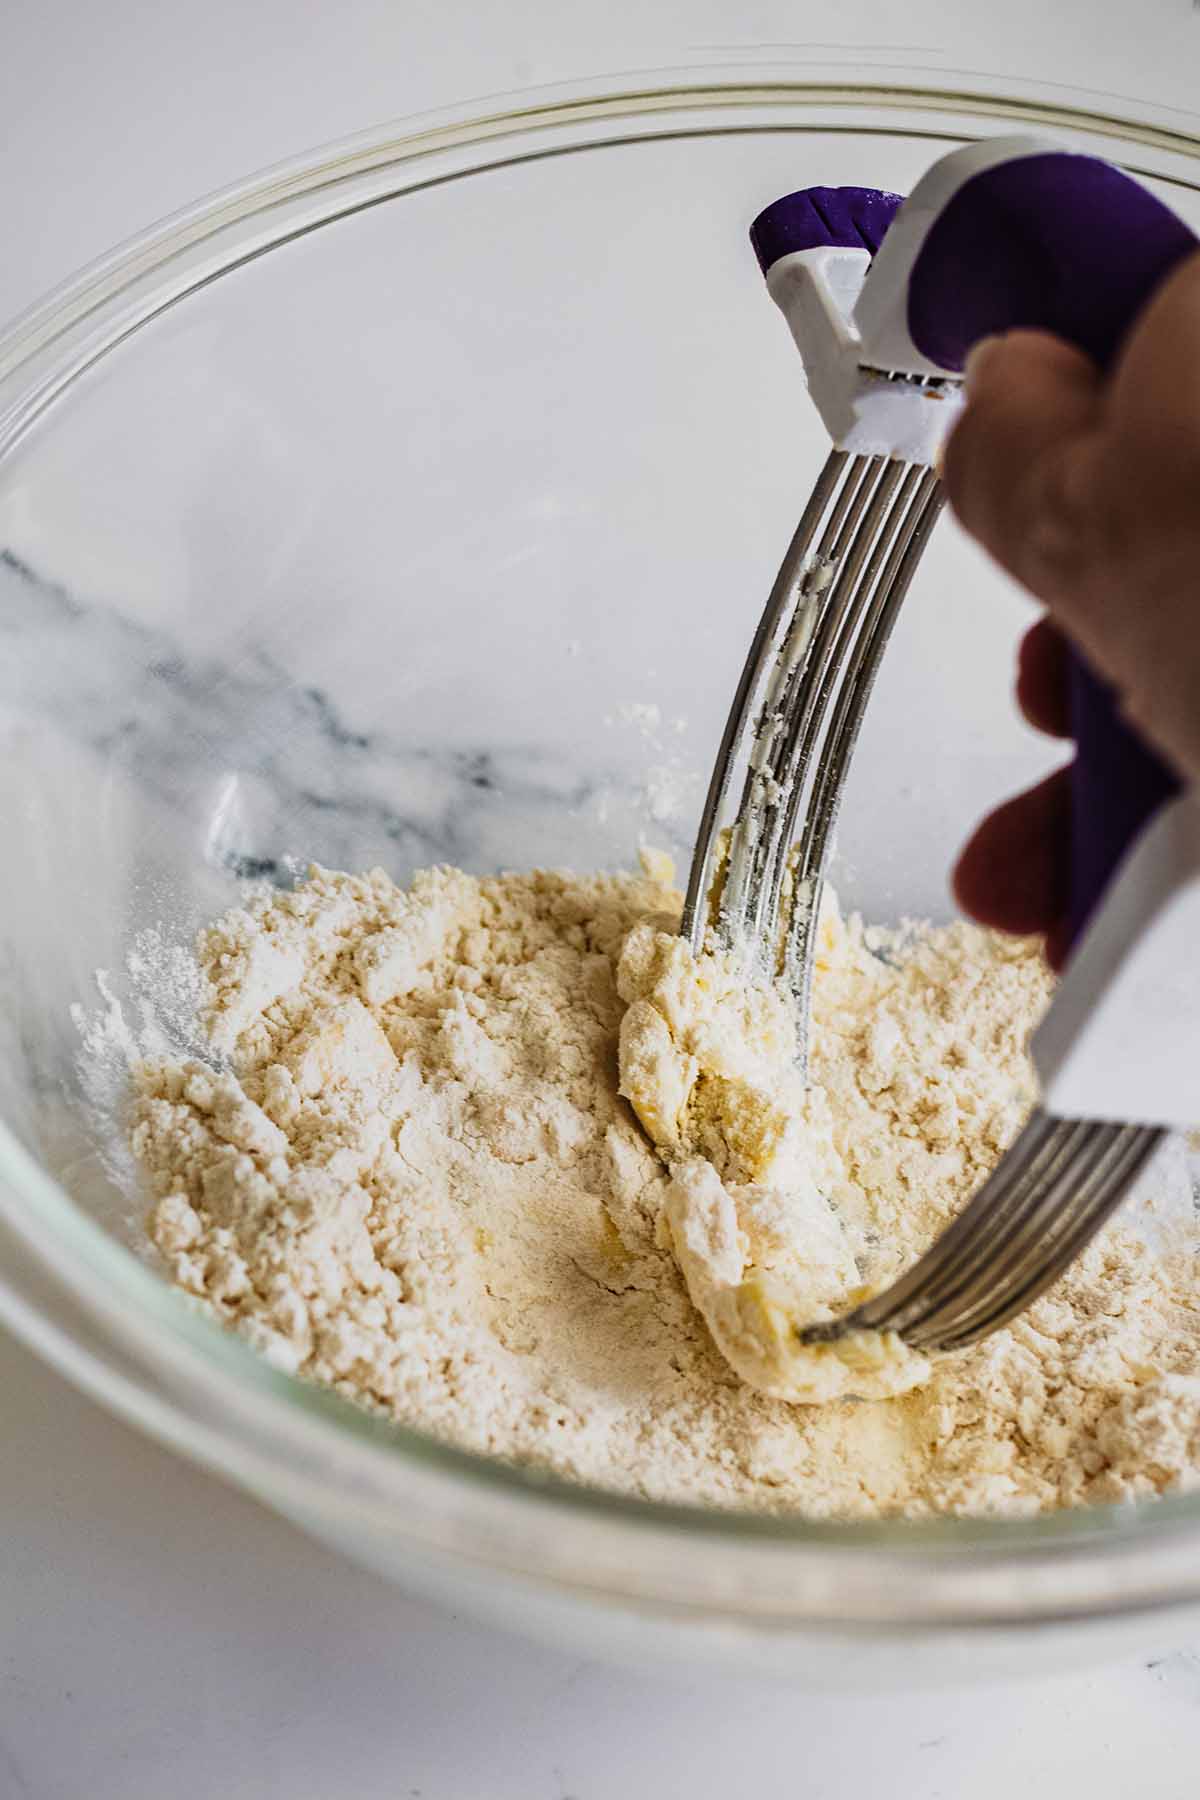 Flour and butter in a glass bowl with a pastry cutter